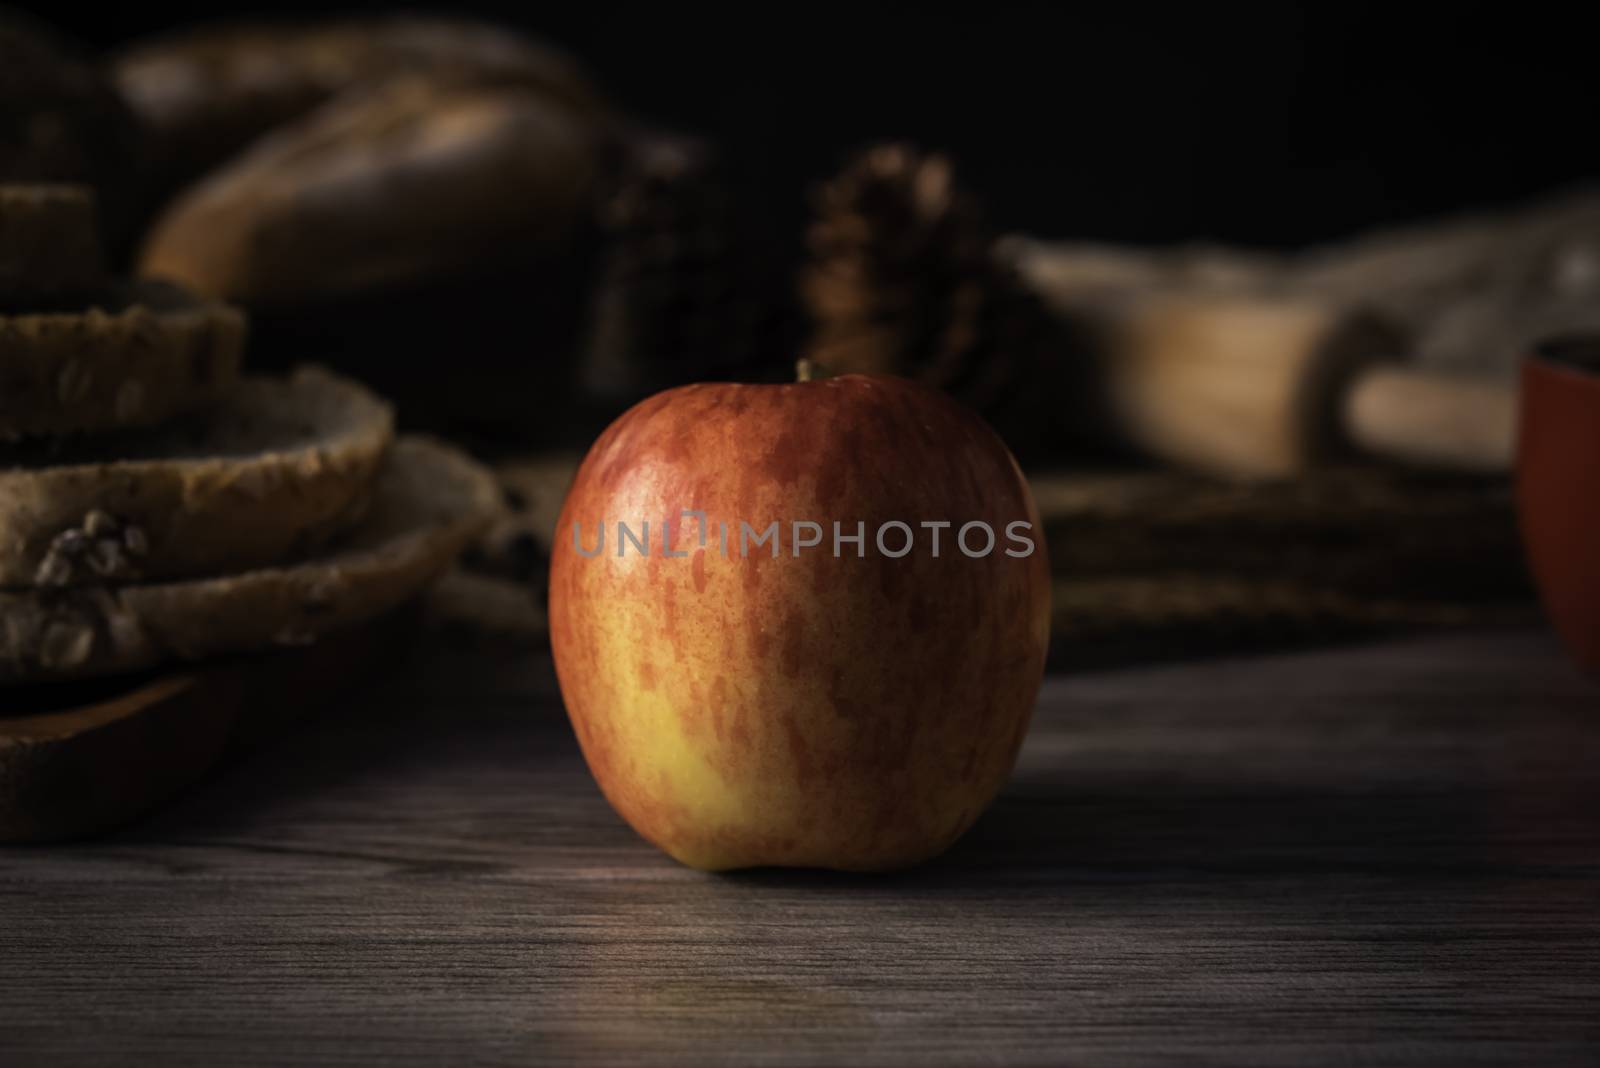 Red apples are laid on a wooden floor - concept lifestyle